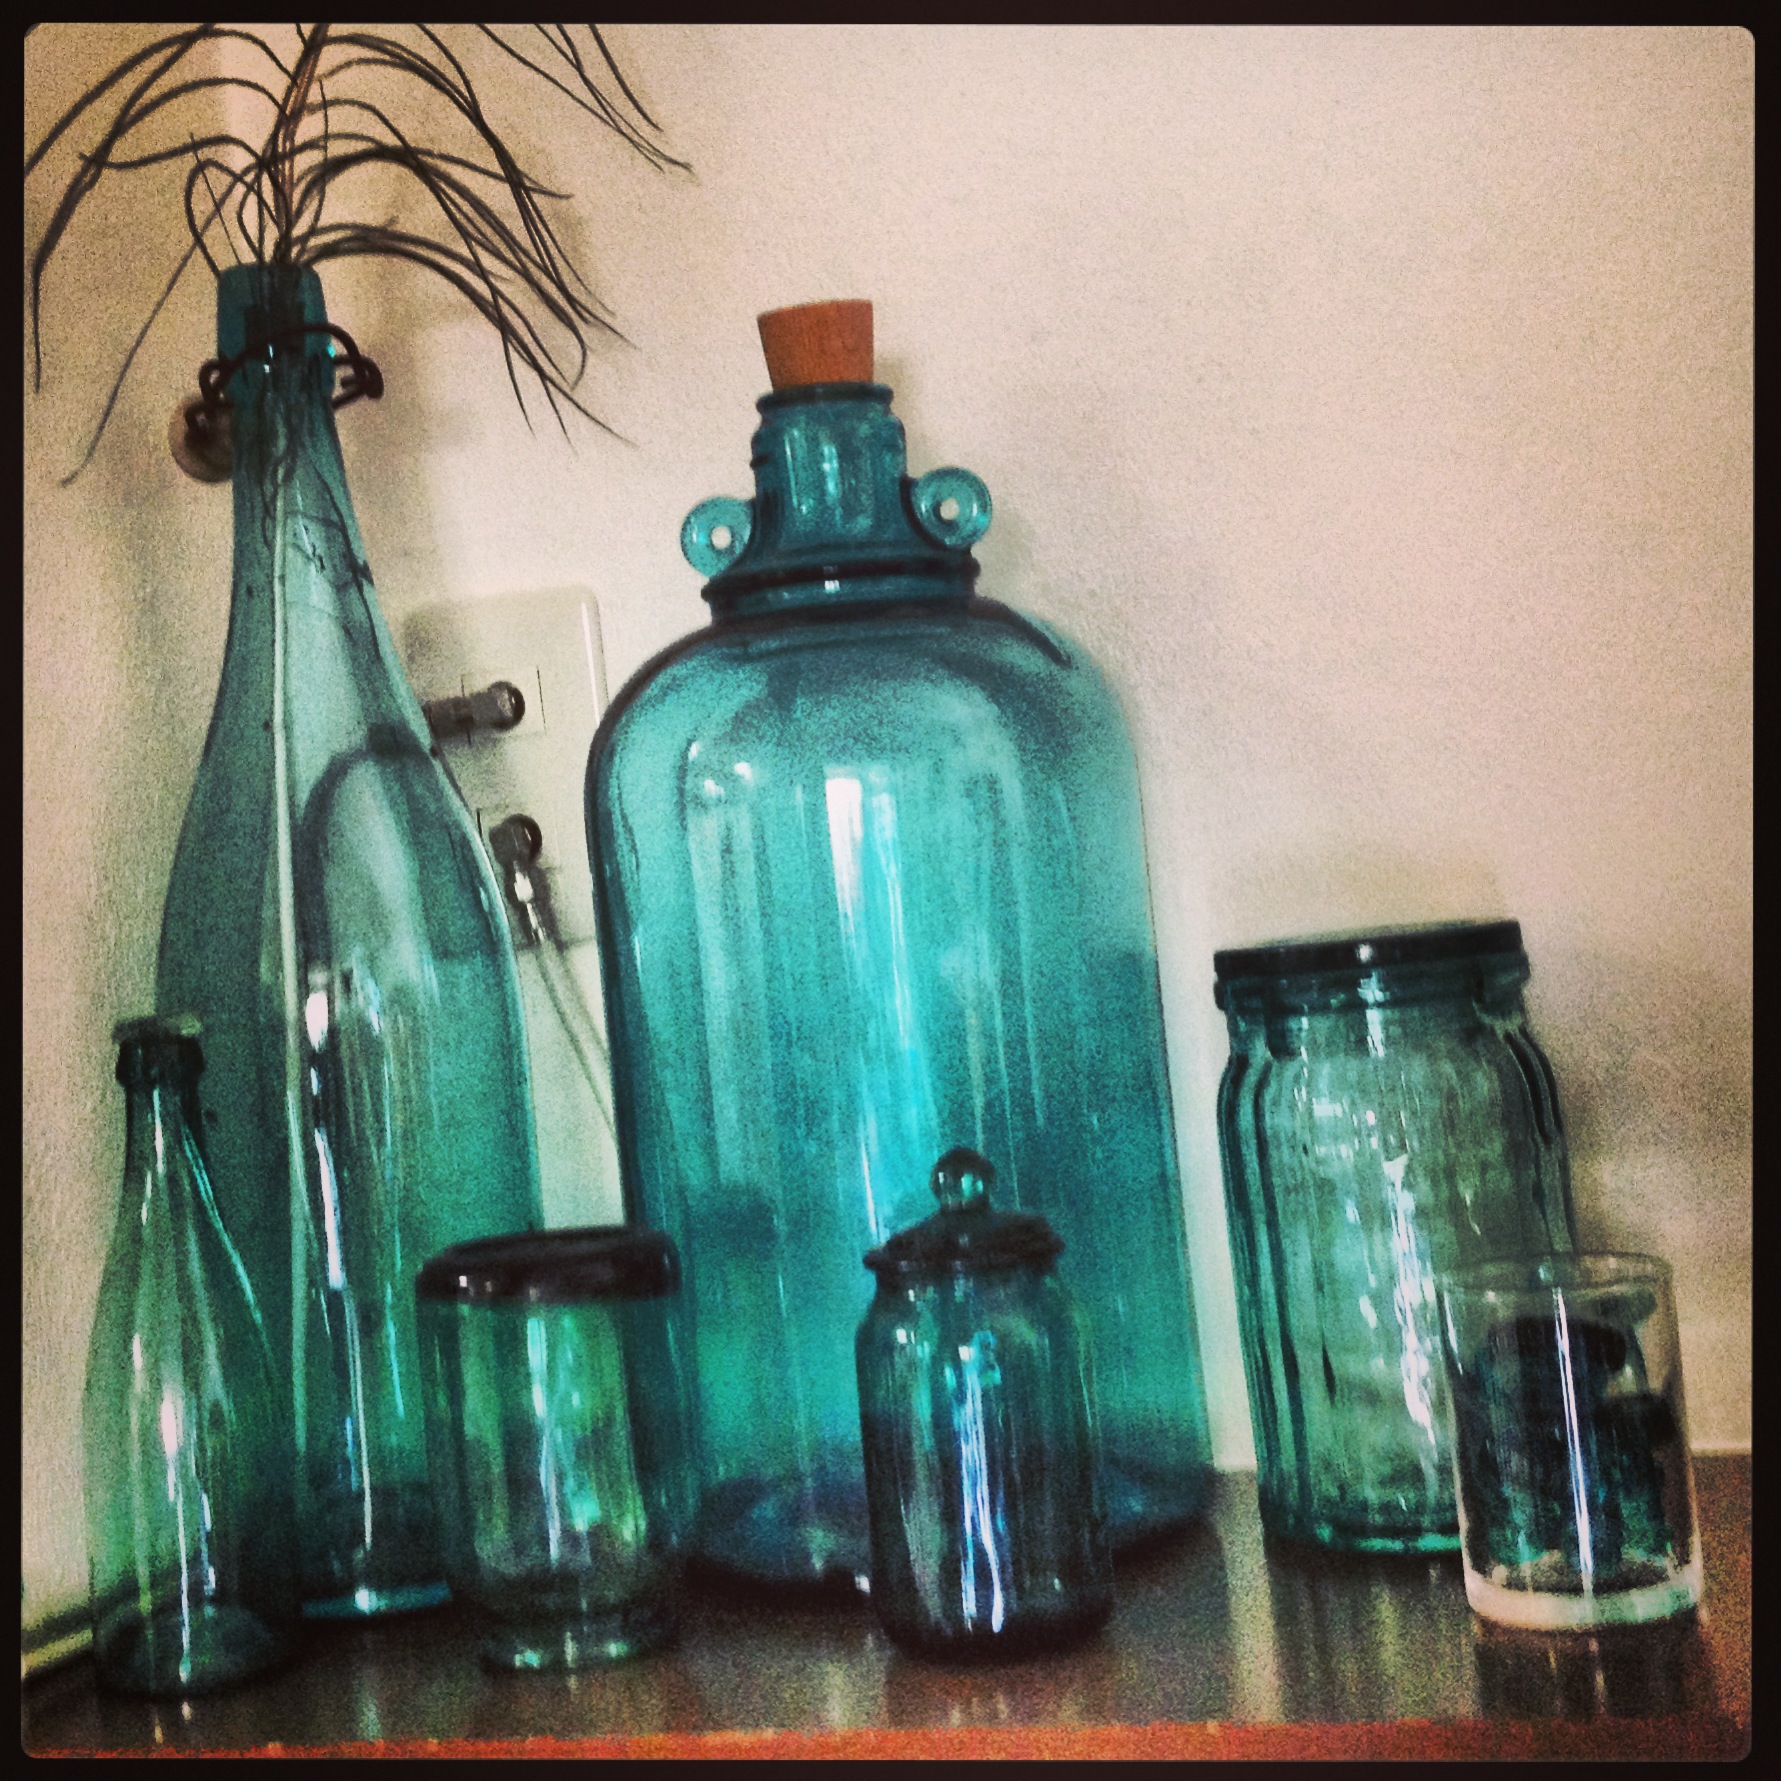 other glass jugs and bottles